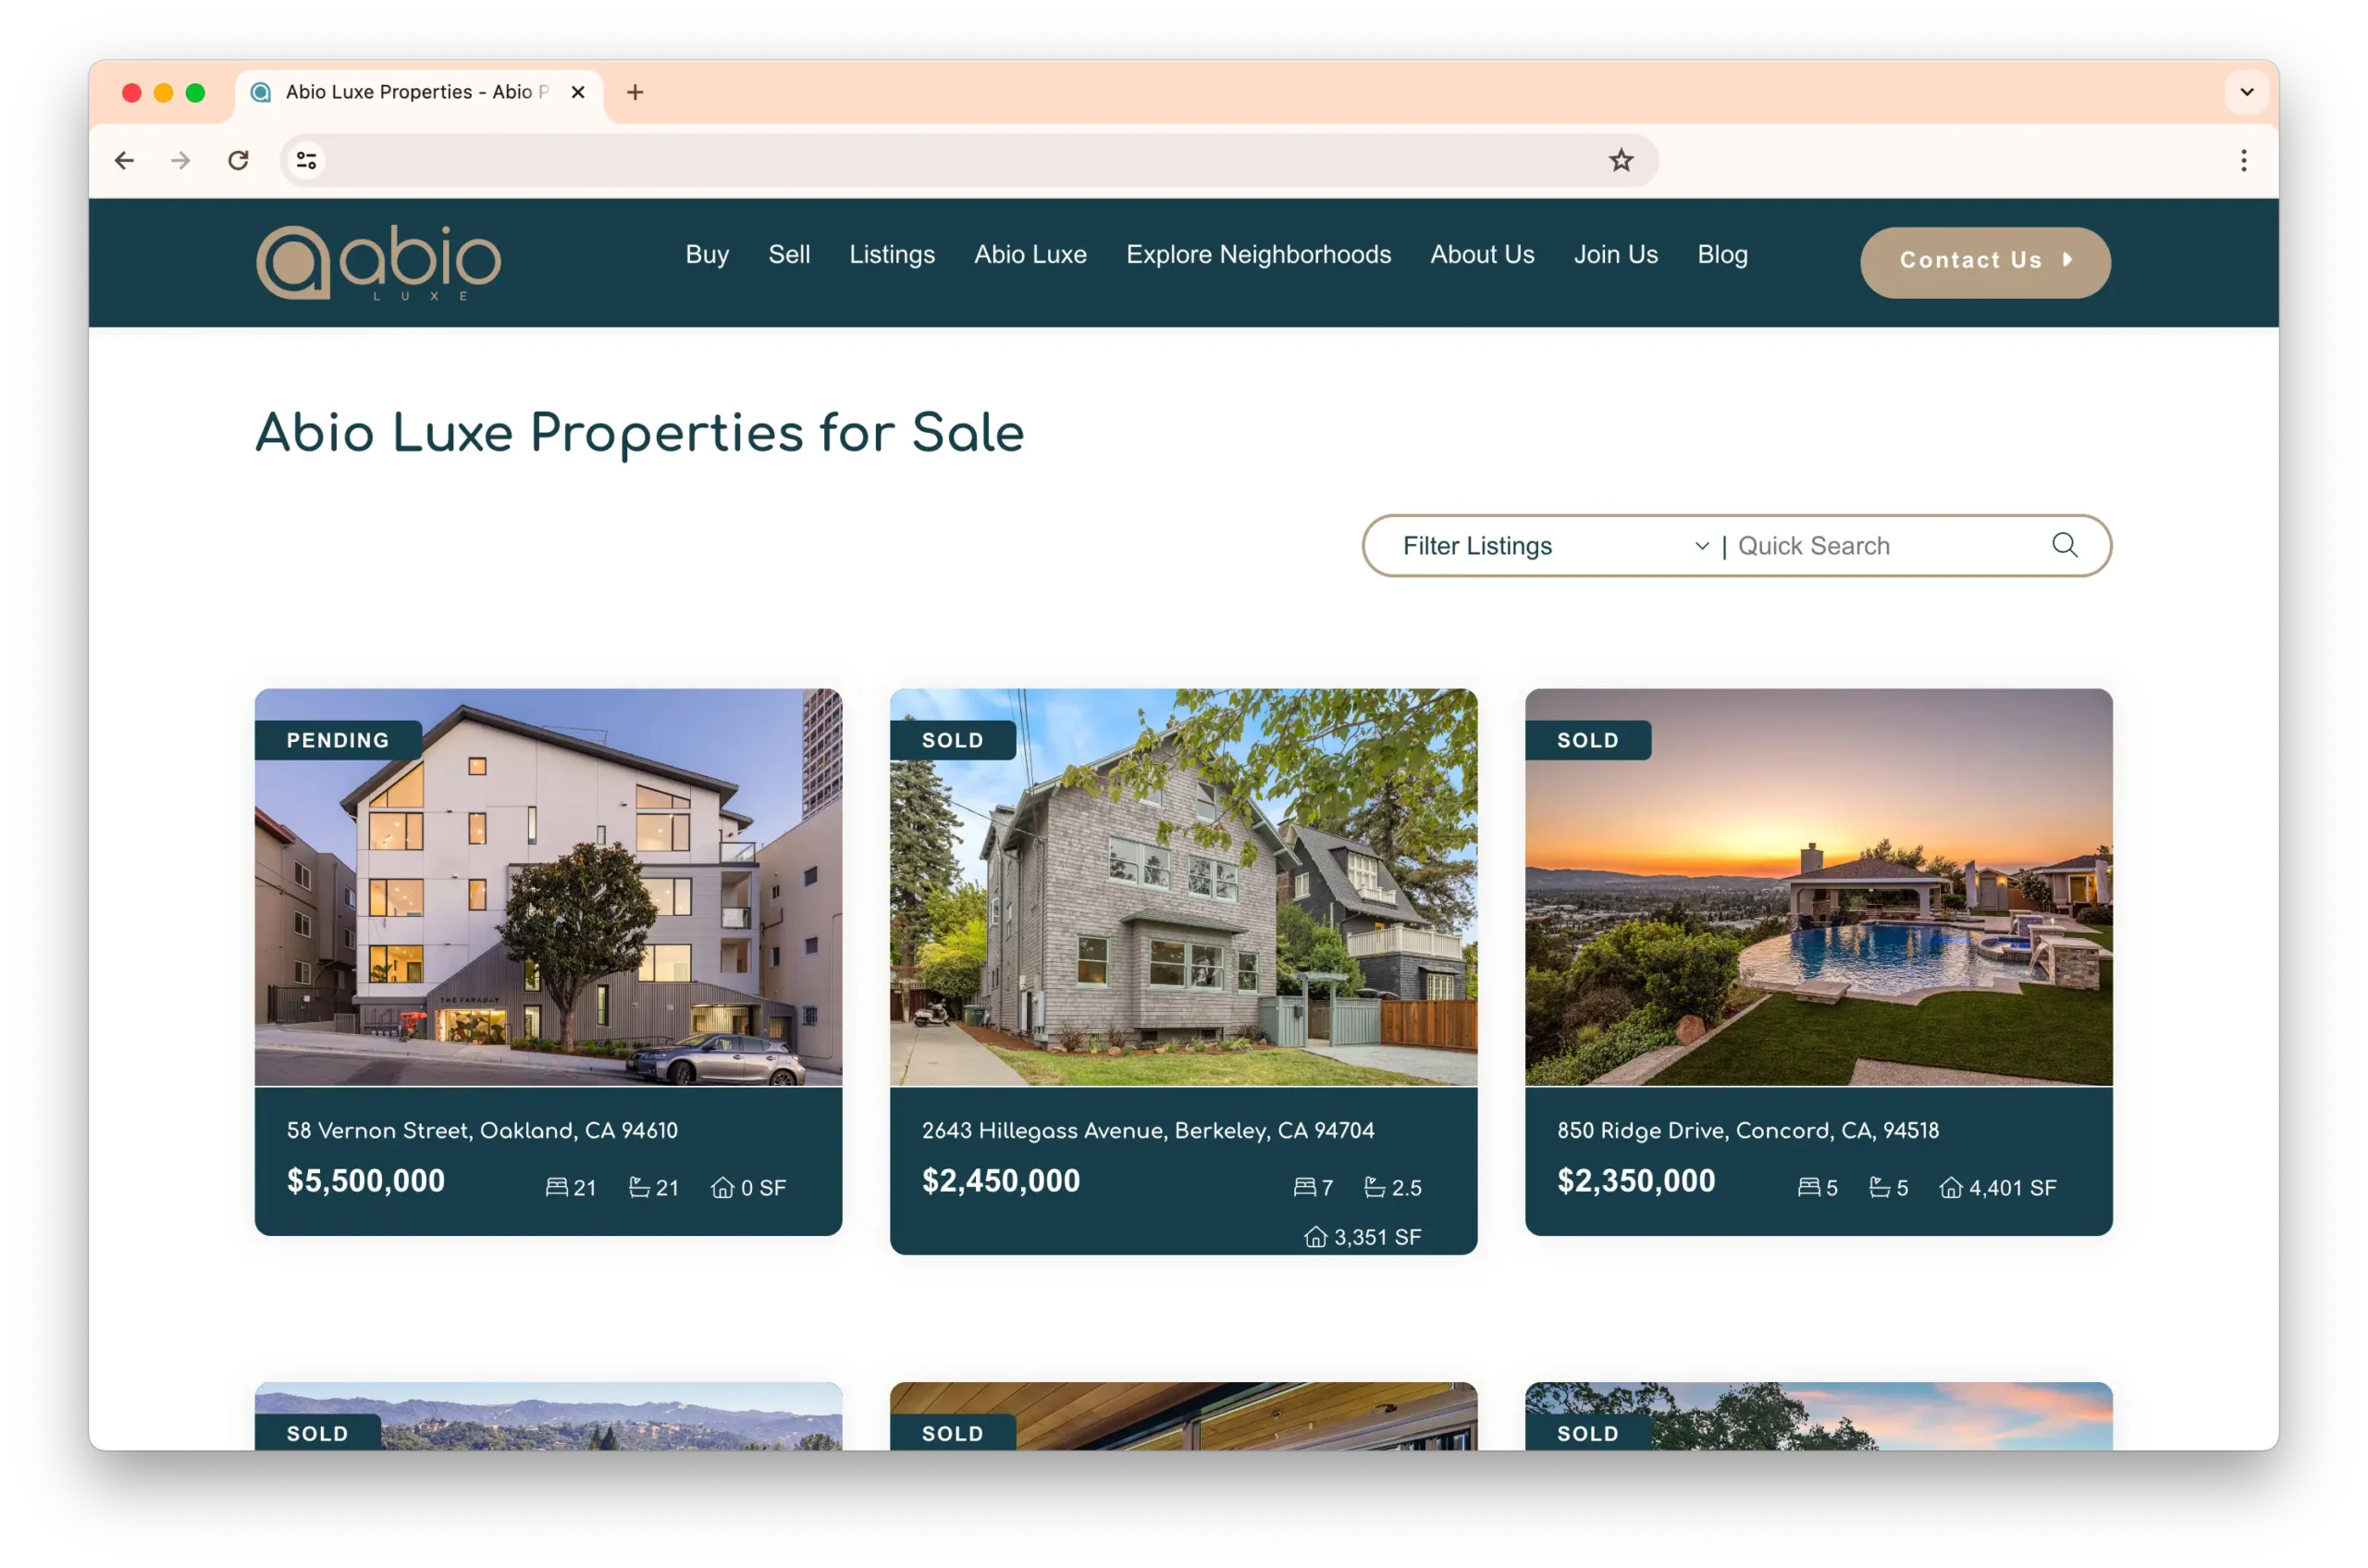 A webpage for Abio Luxe showcasing properties for sale. Three properties are highlighted: 58 Vernon Street in Oakland, 2643 Hillegass Avenue in Berkeley, and 850 Ridge Drive in Concord, with their statuses and prices.